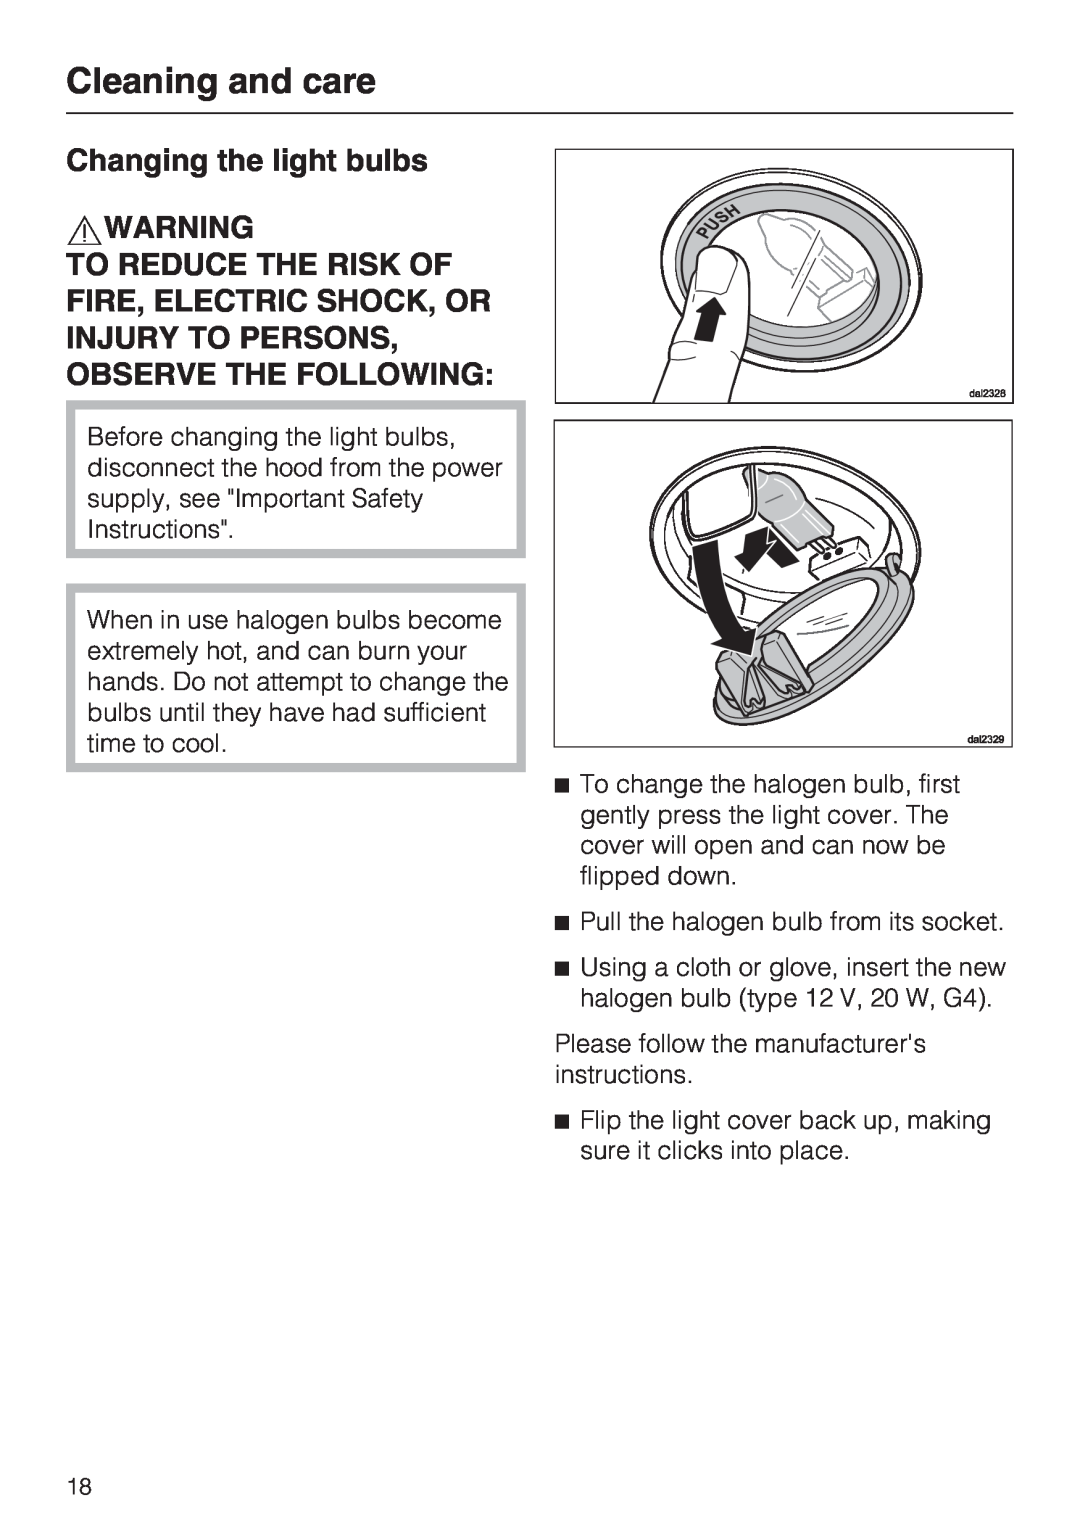 Miele DA 6590 D installation instructions Changing the light bulbs, Cleaning and care 